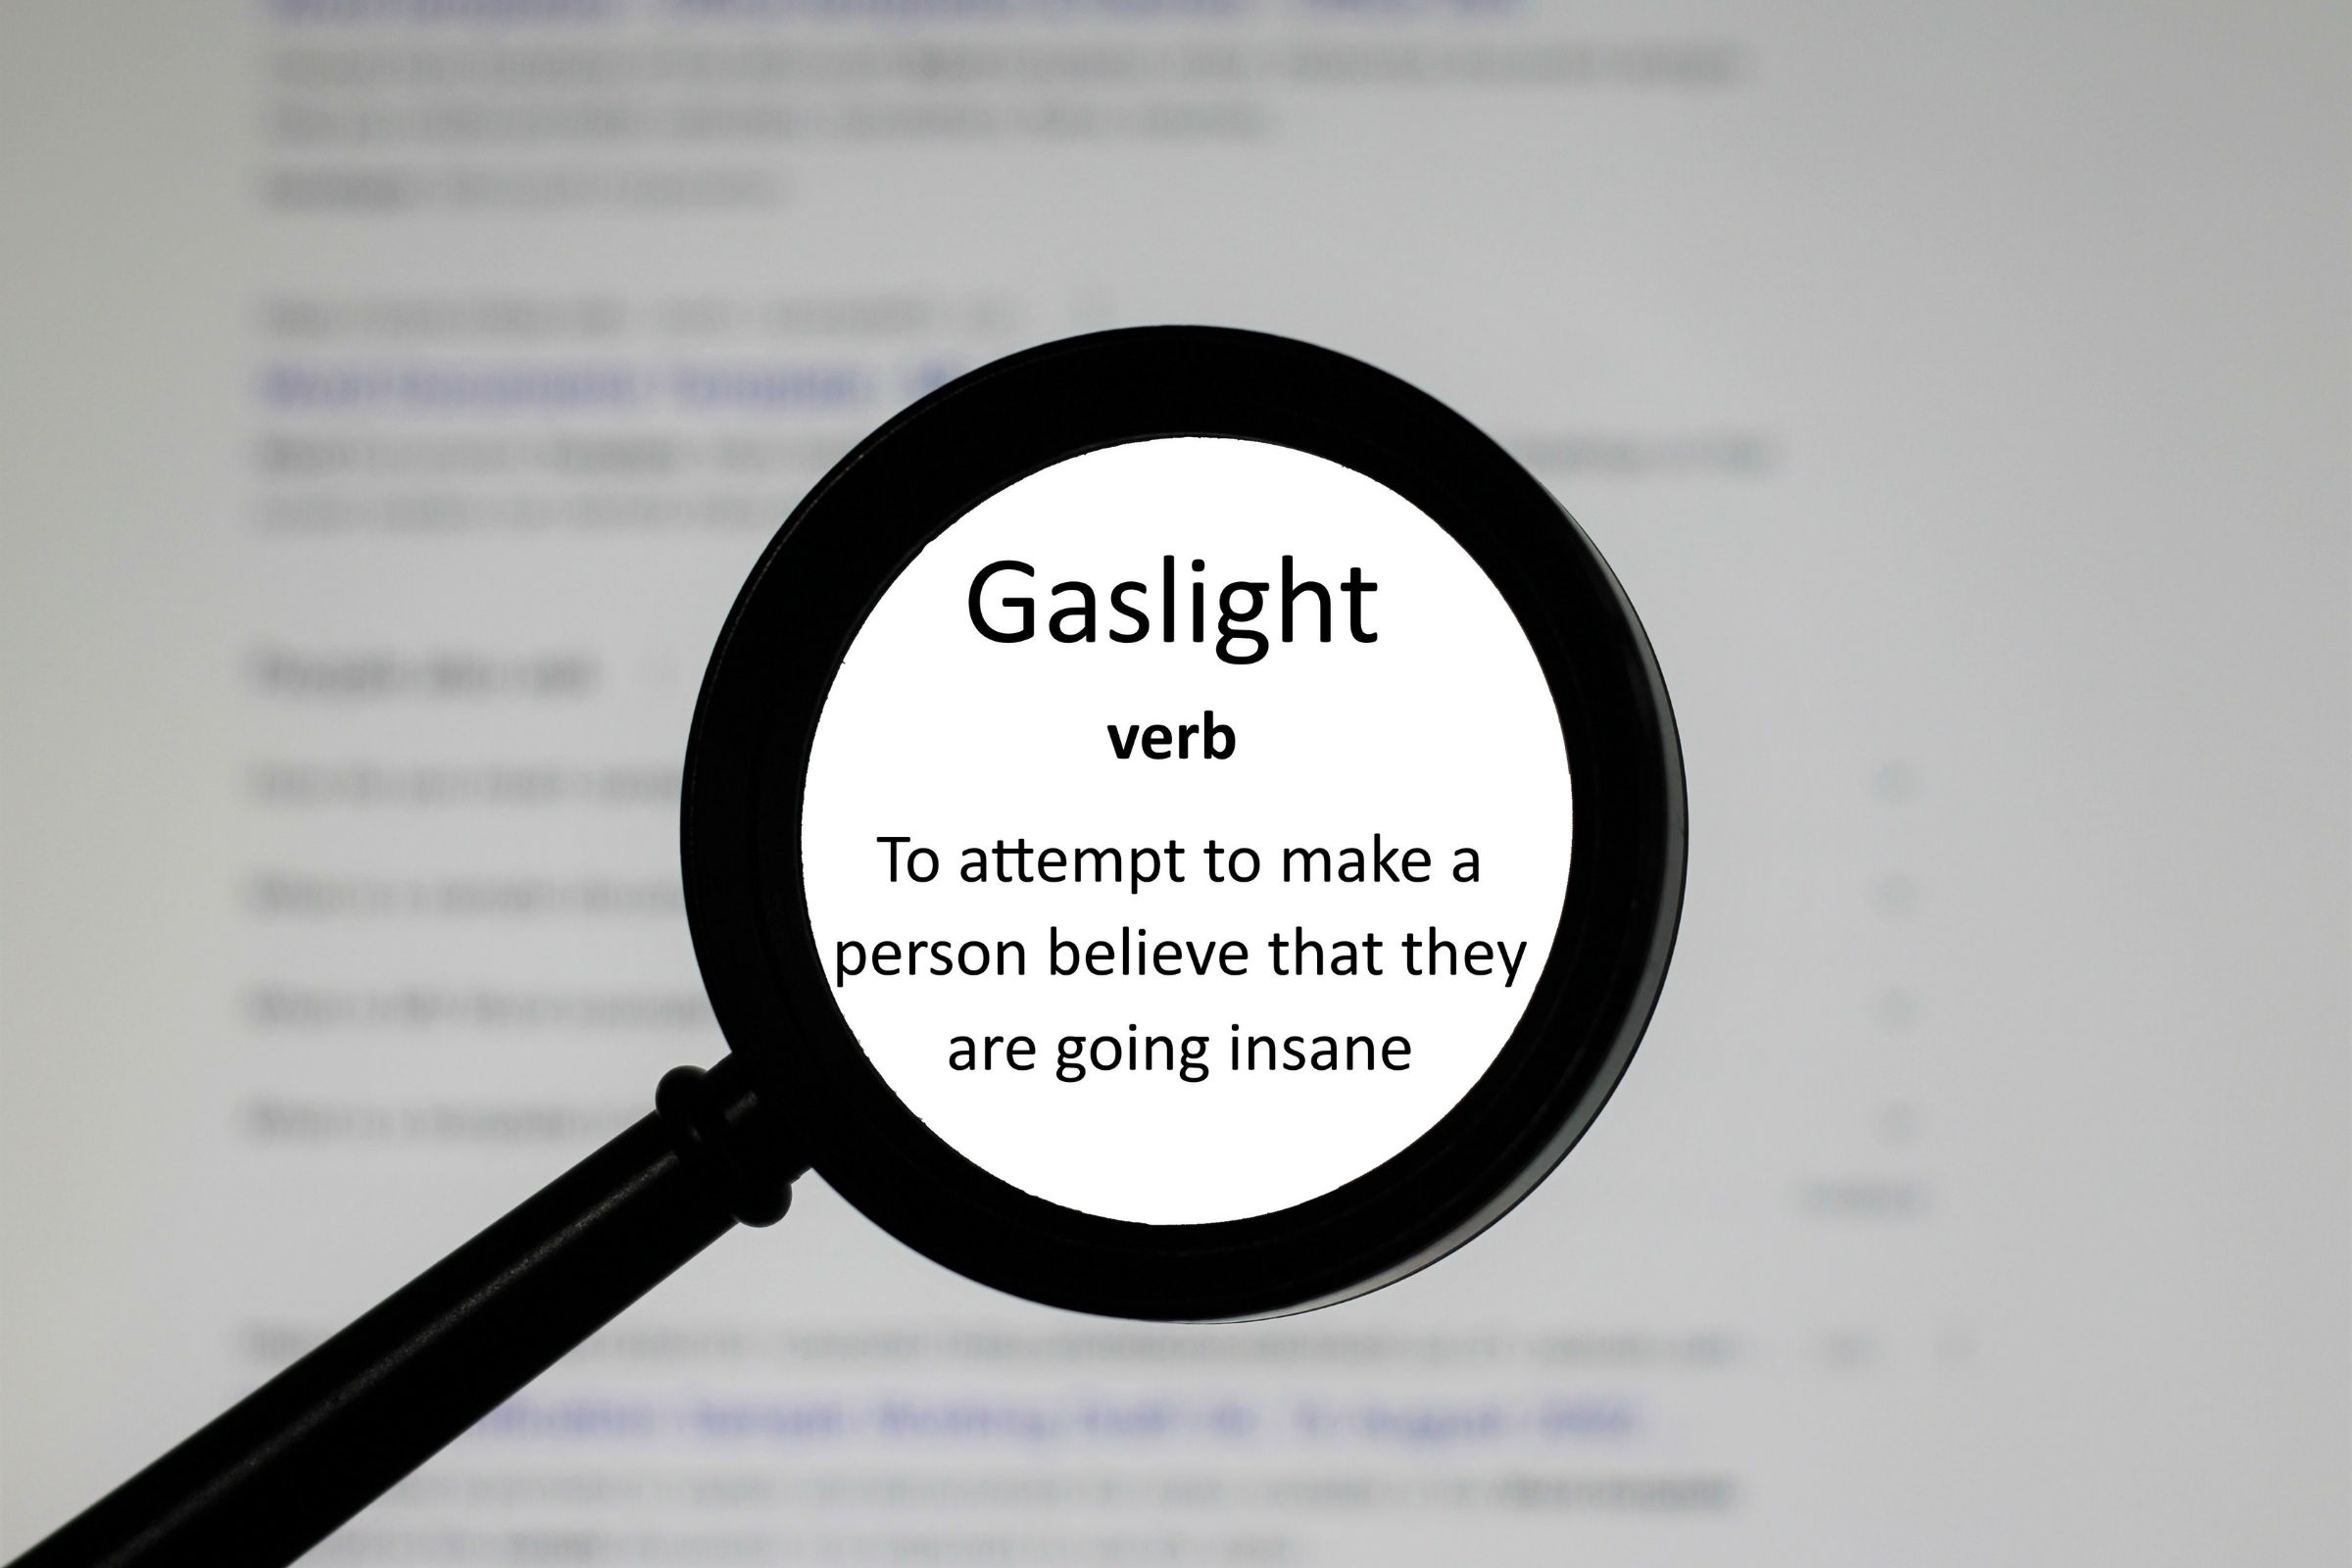 Have You Been Gaslighted?